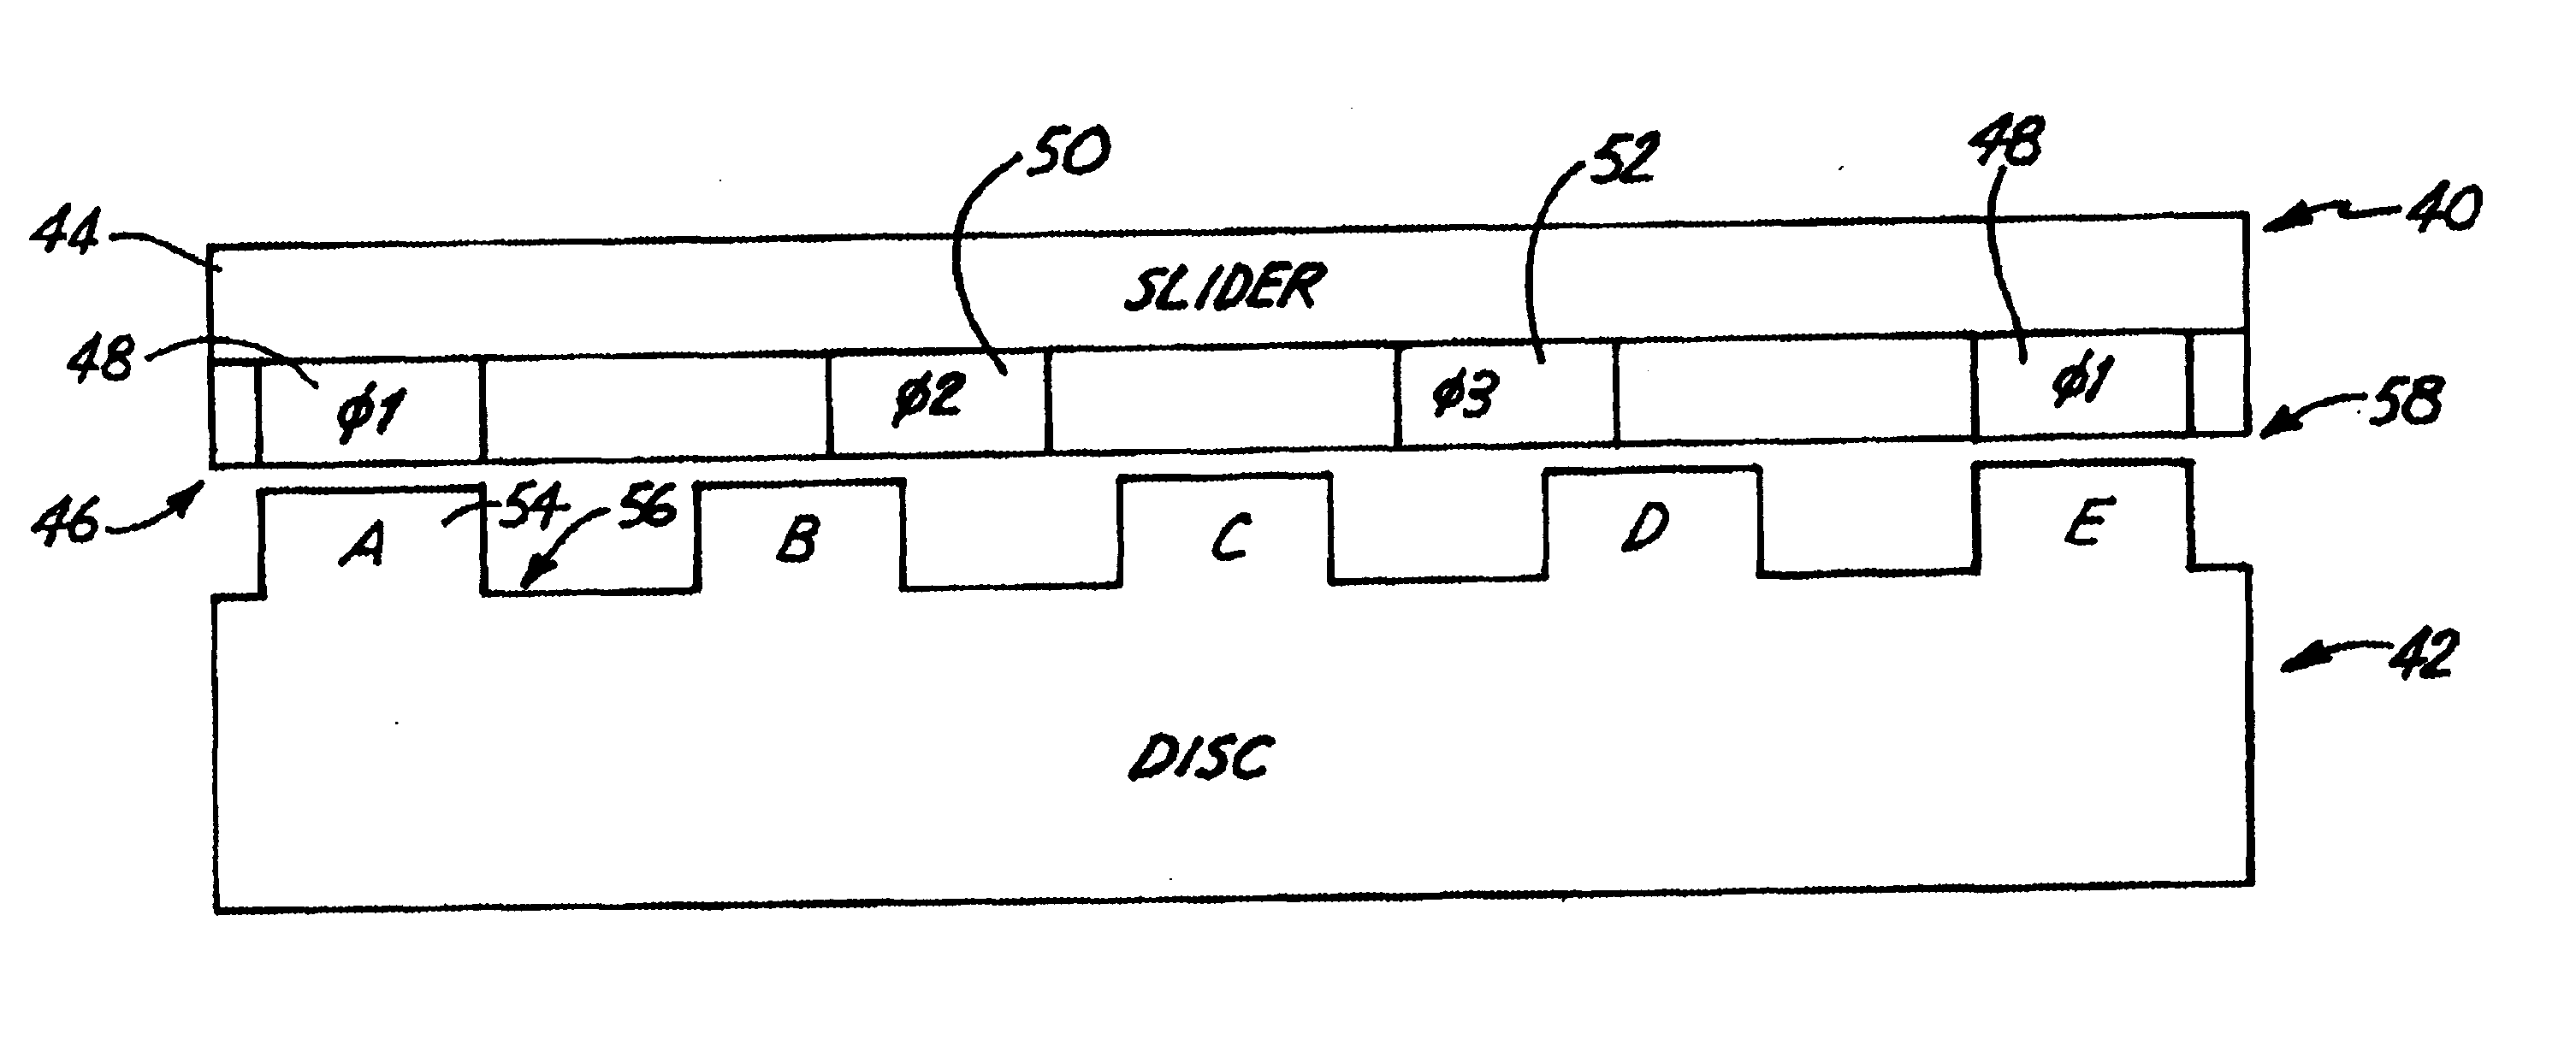 Electrostatic track following using patterned media